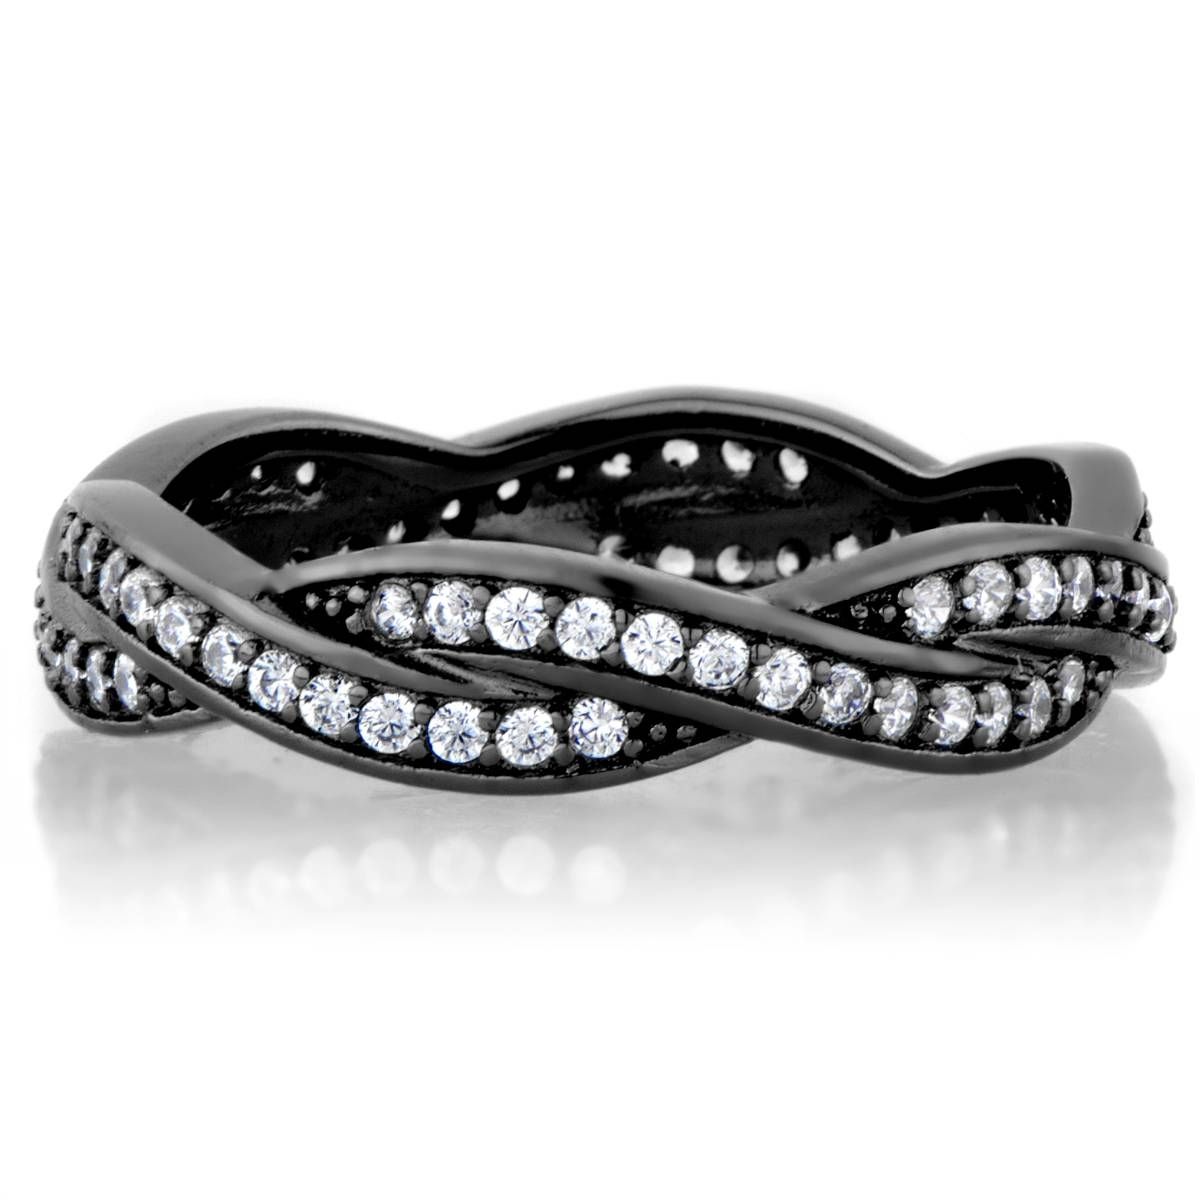 Devera's Black And White Cz Twisted Wedding Ring With Regard To Infinity Twist Wedding Bands (View 11 of 15)